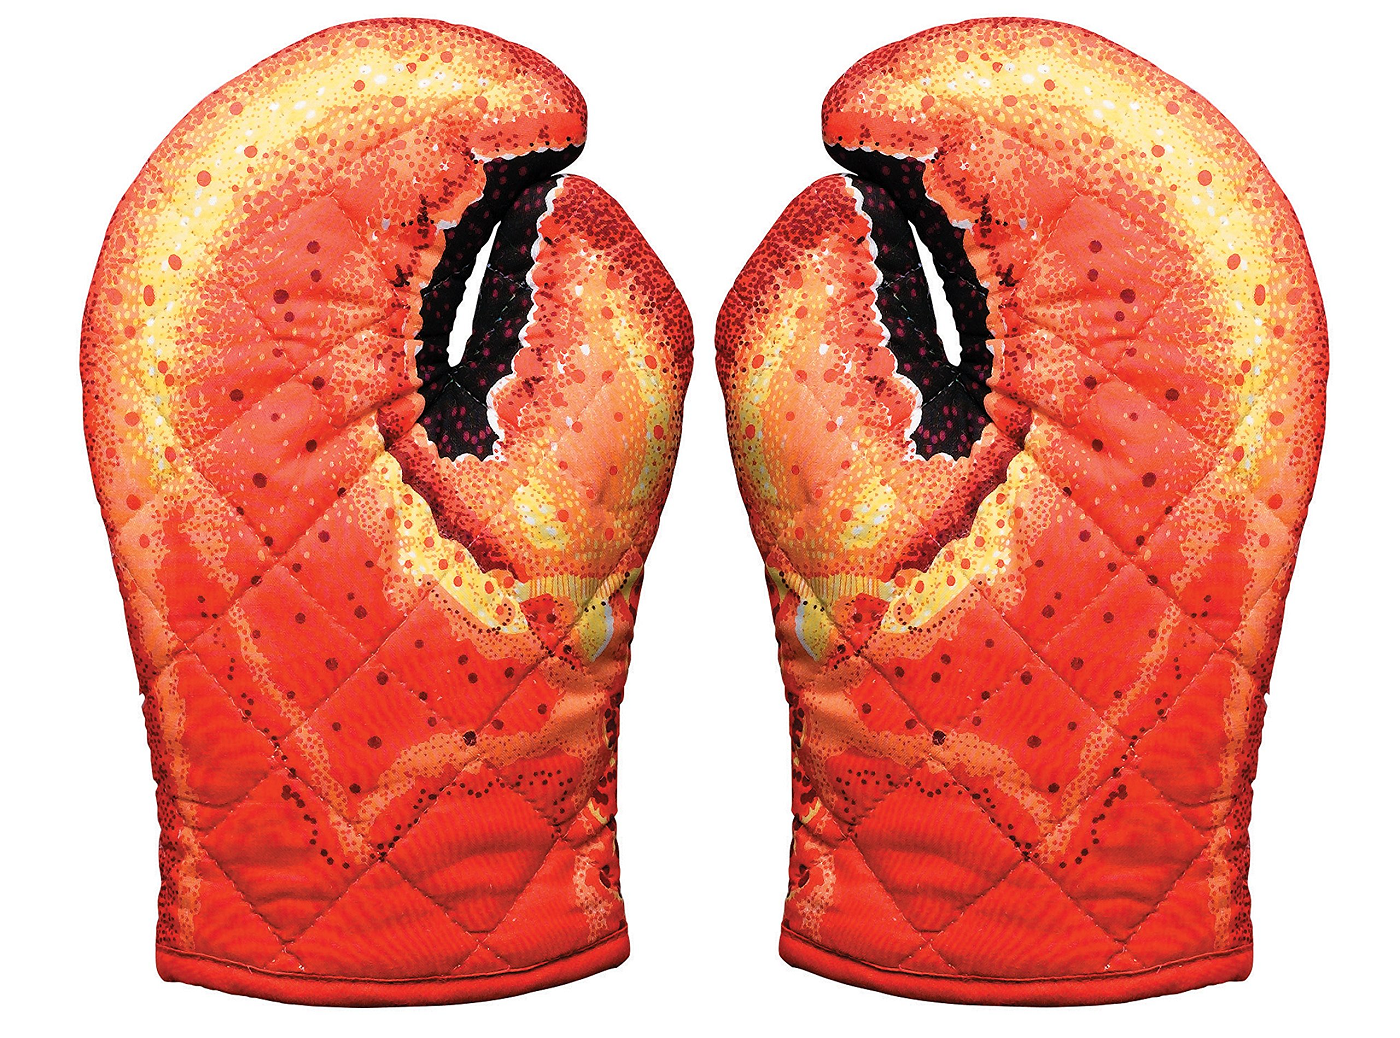 Lobster Claw Oven Mitts, One Size, Lobster Claw Kitchen Oven Mitts Quilted Cotton Microwave Oven Gloves Heat Resistant Nonslip for Cooking BBQ Baking - image 1 of 1